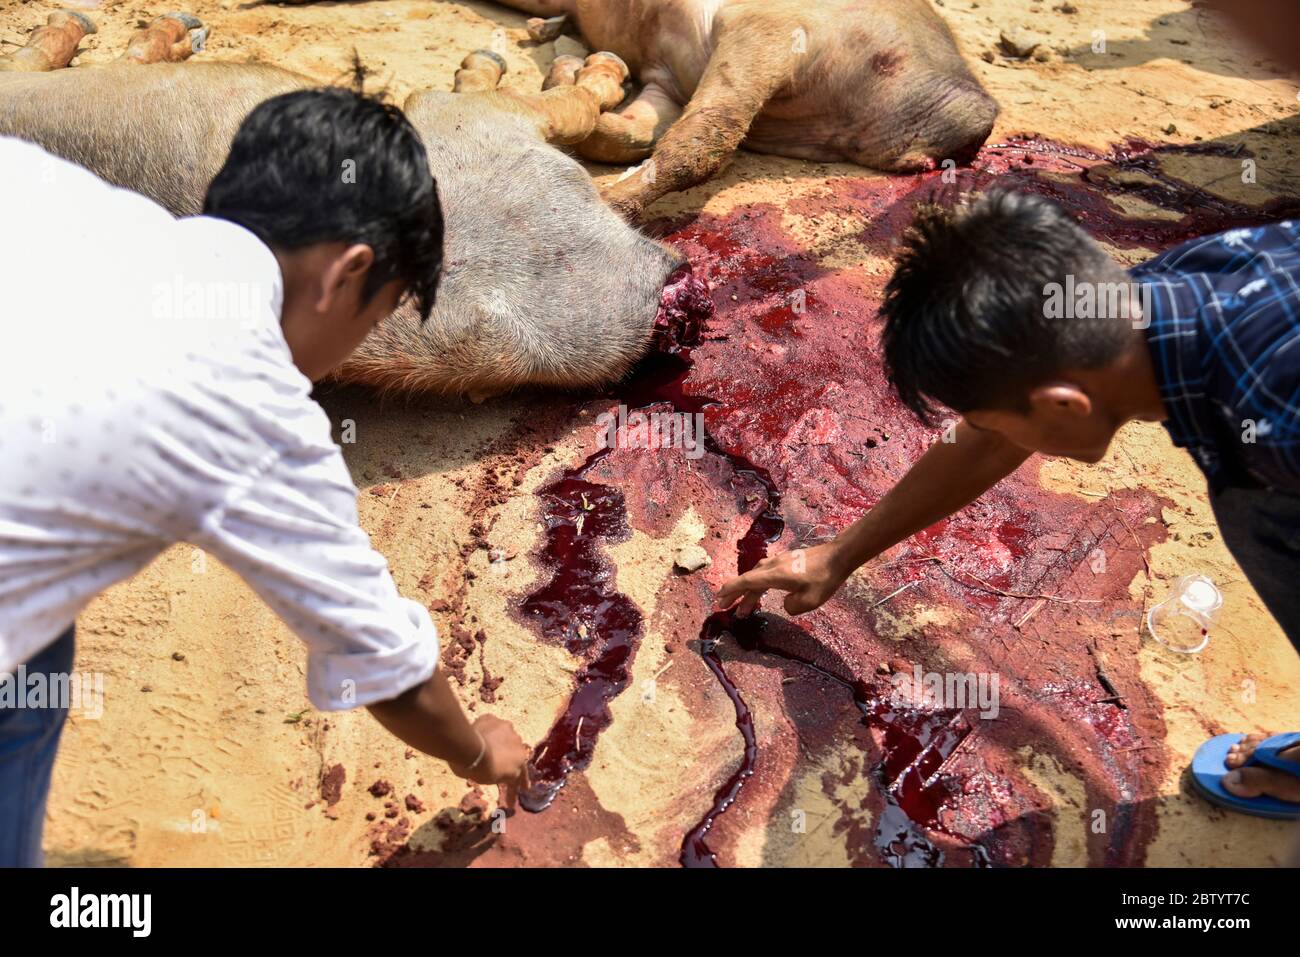 INDIA: Devotees dips their fingers into the creature's spilled blood. GRUESOME photos show ruthless crowds baying for blood as buffalos are brutally s Stock Photo